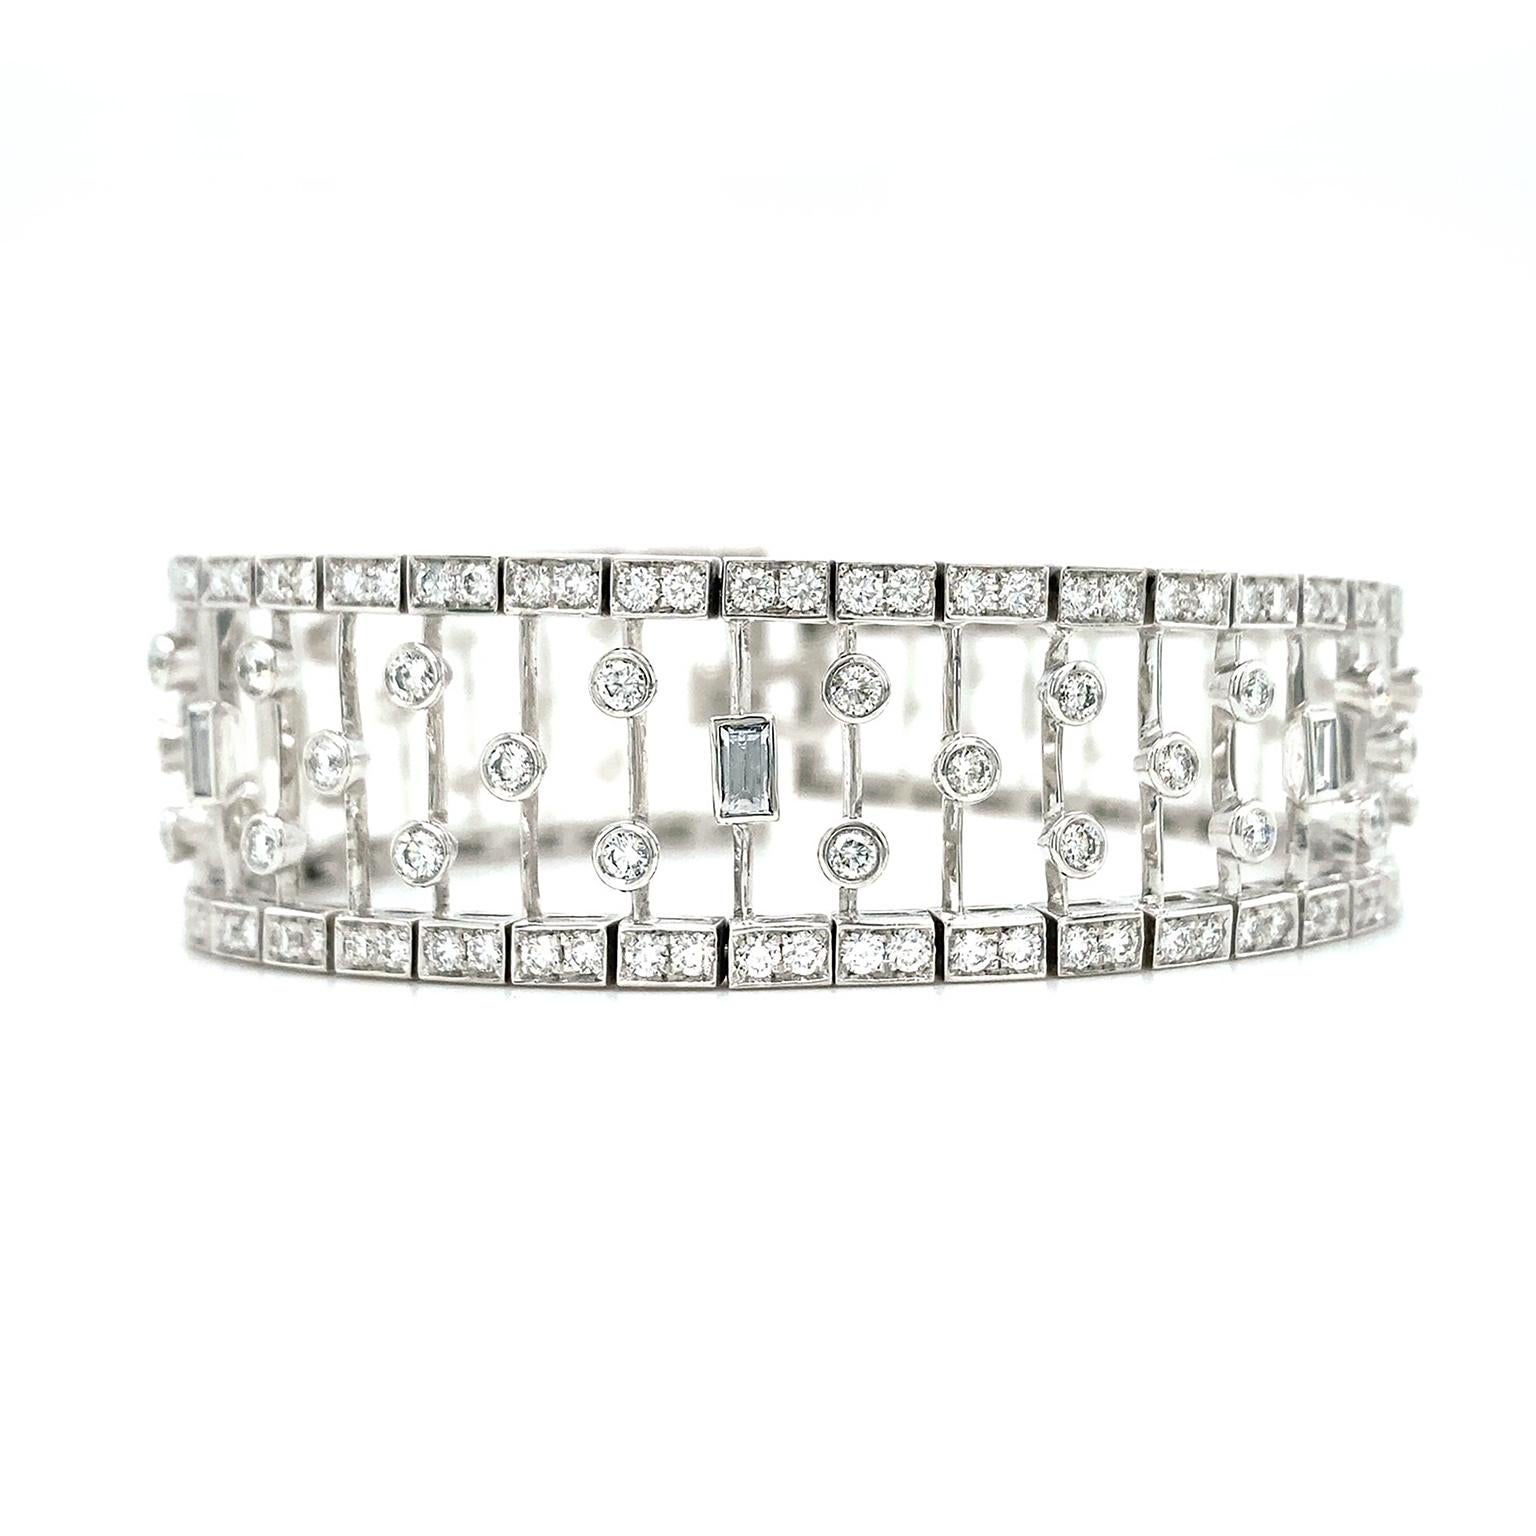 Symmetry and flickering diamonds make for a sophisticated bracelet. The paved diamond band is narrowest at the clasp and gradually becomes wider. Within the band is an openwork array of platinum stems that secure a staggered pattern of a single